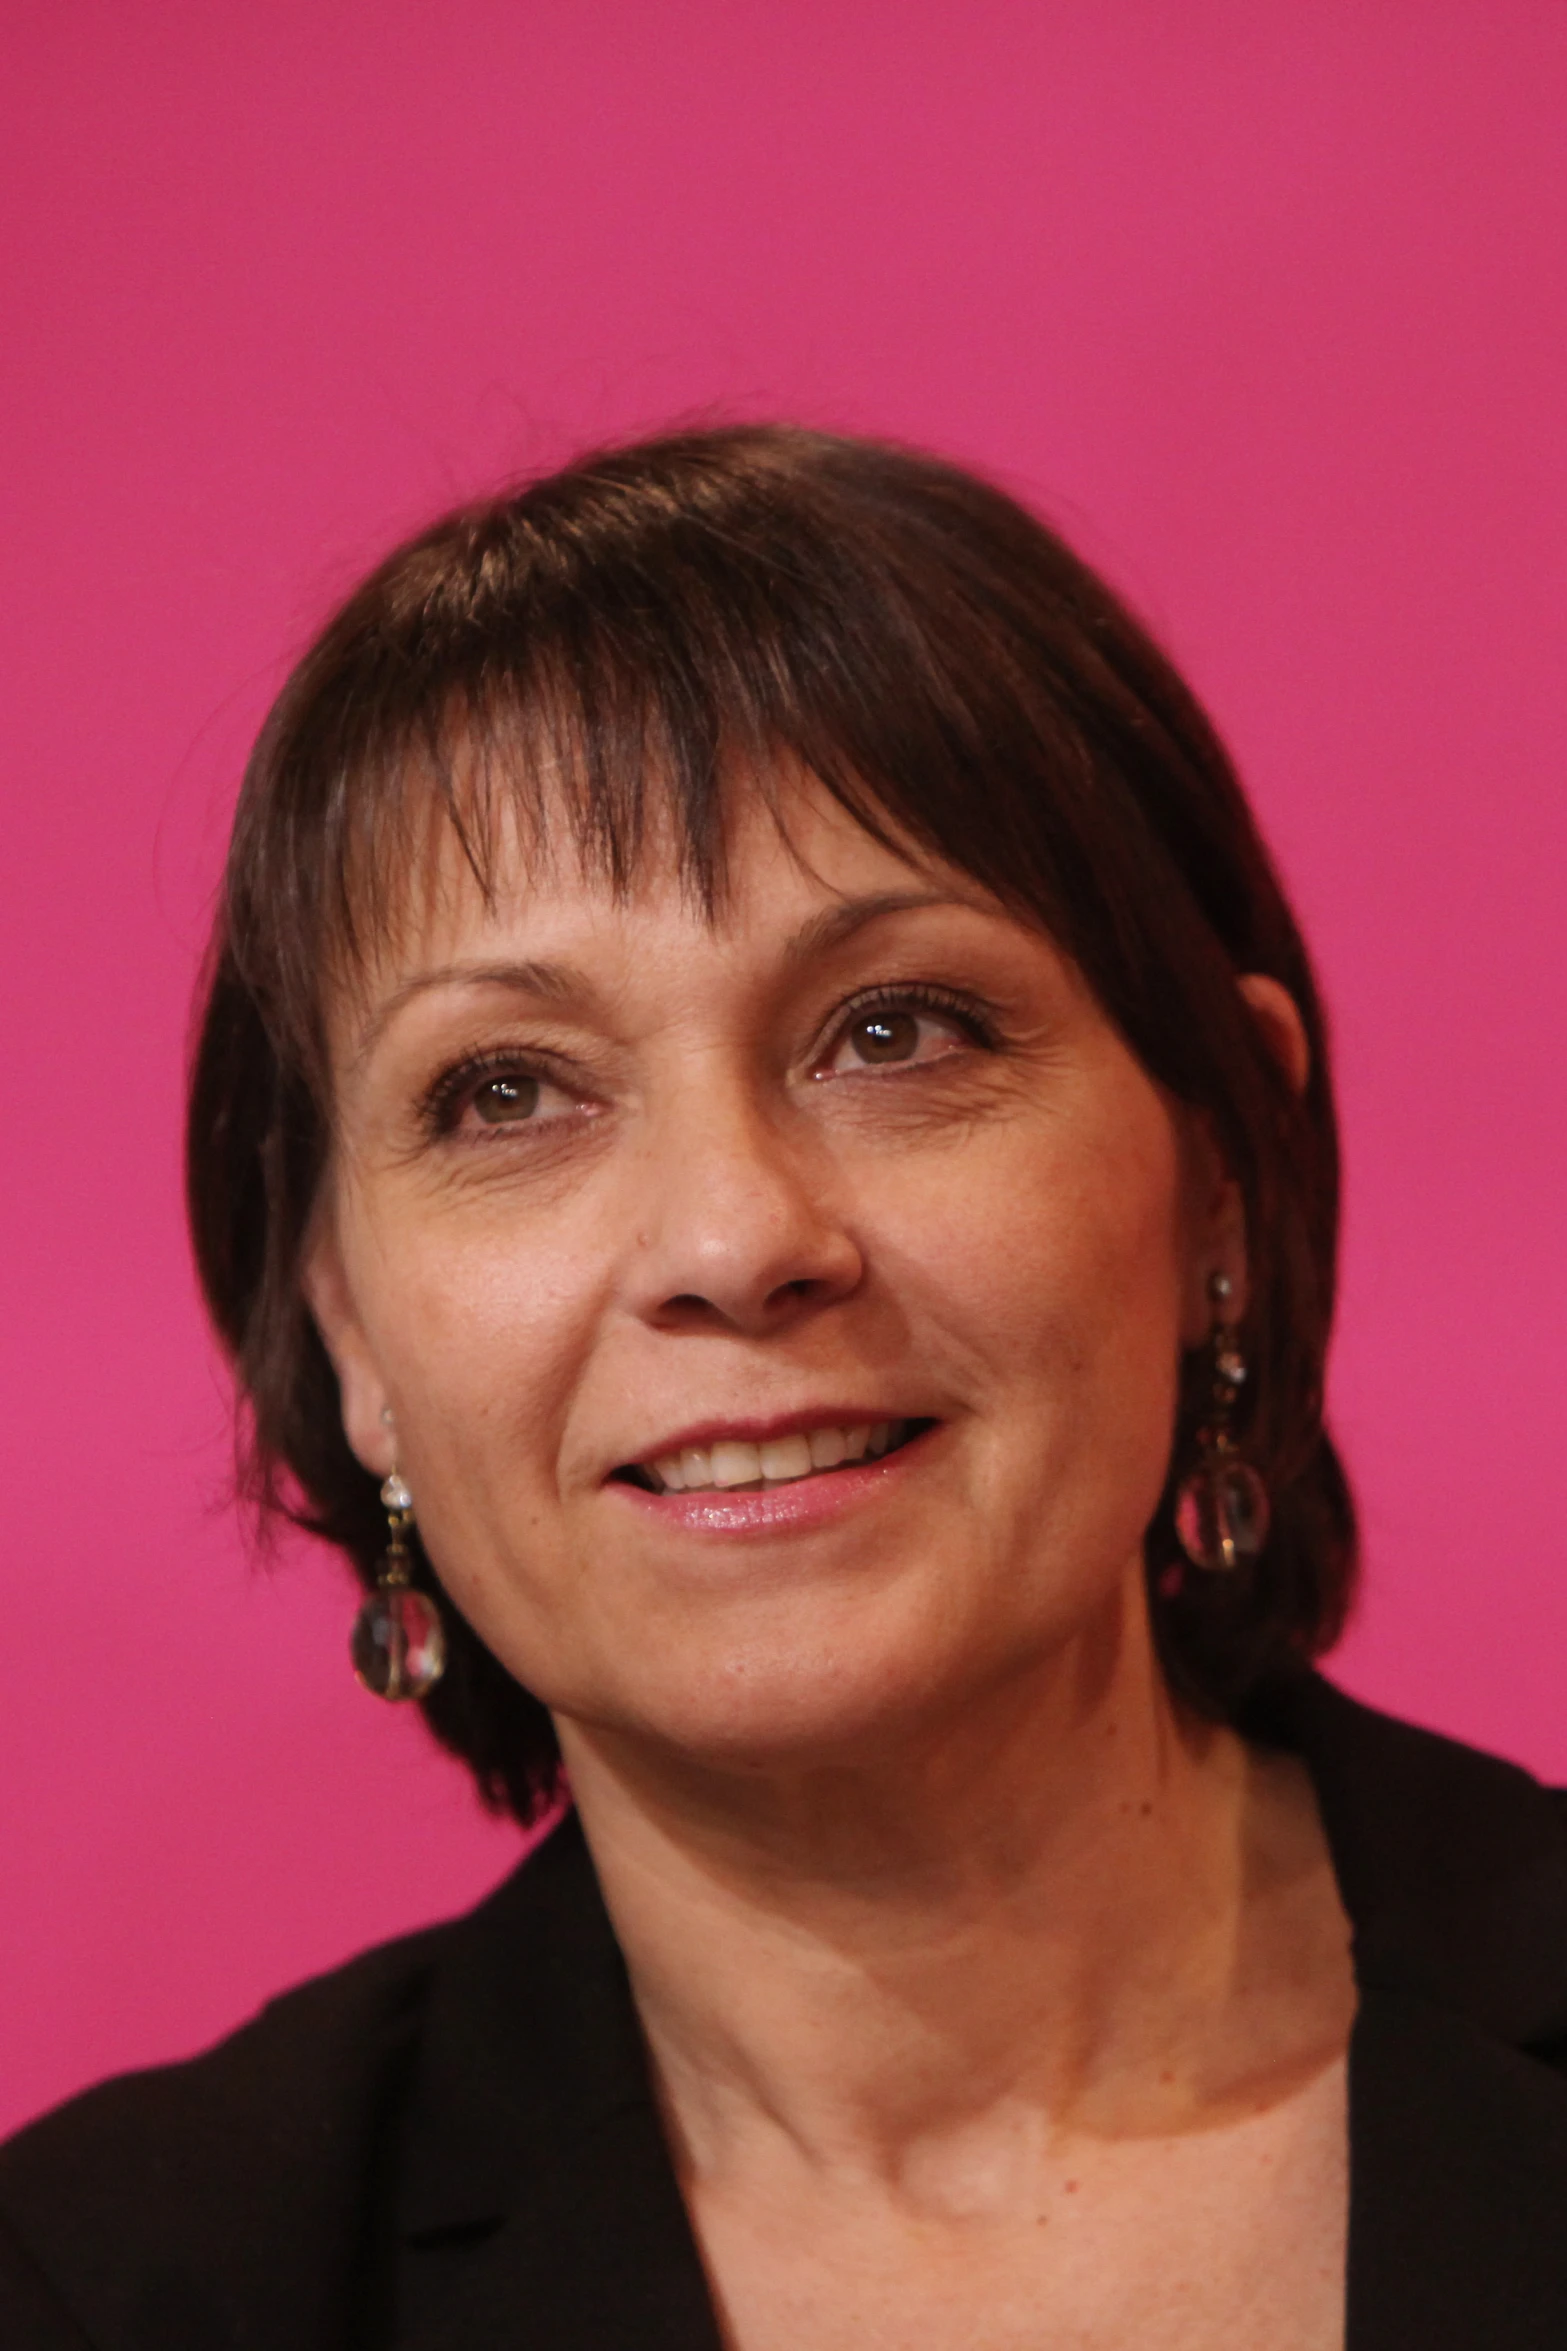 woman wearing earrings with pink background